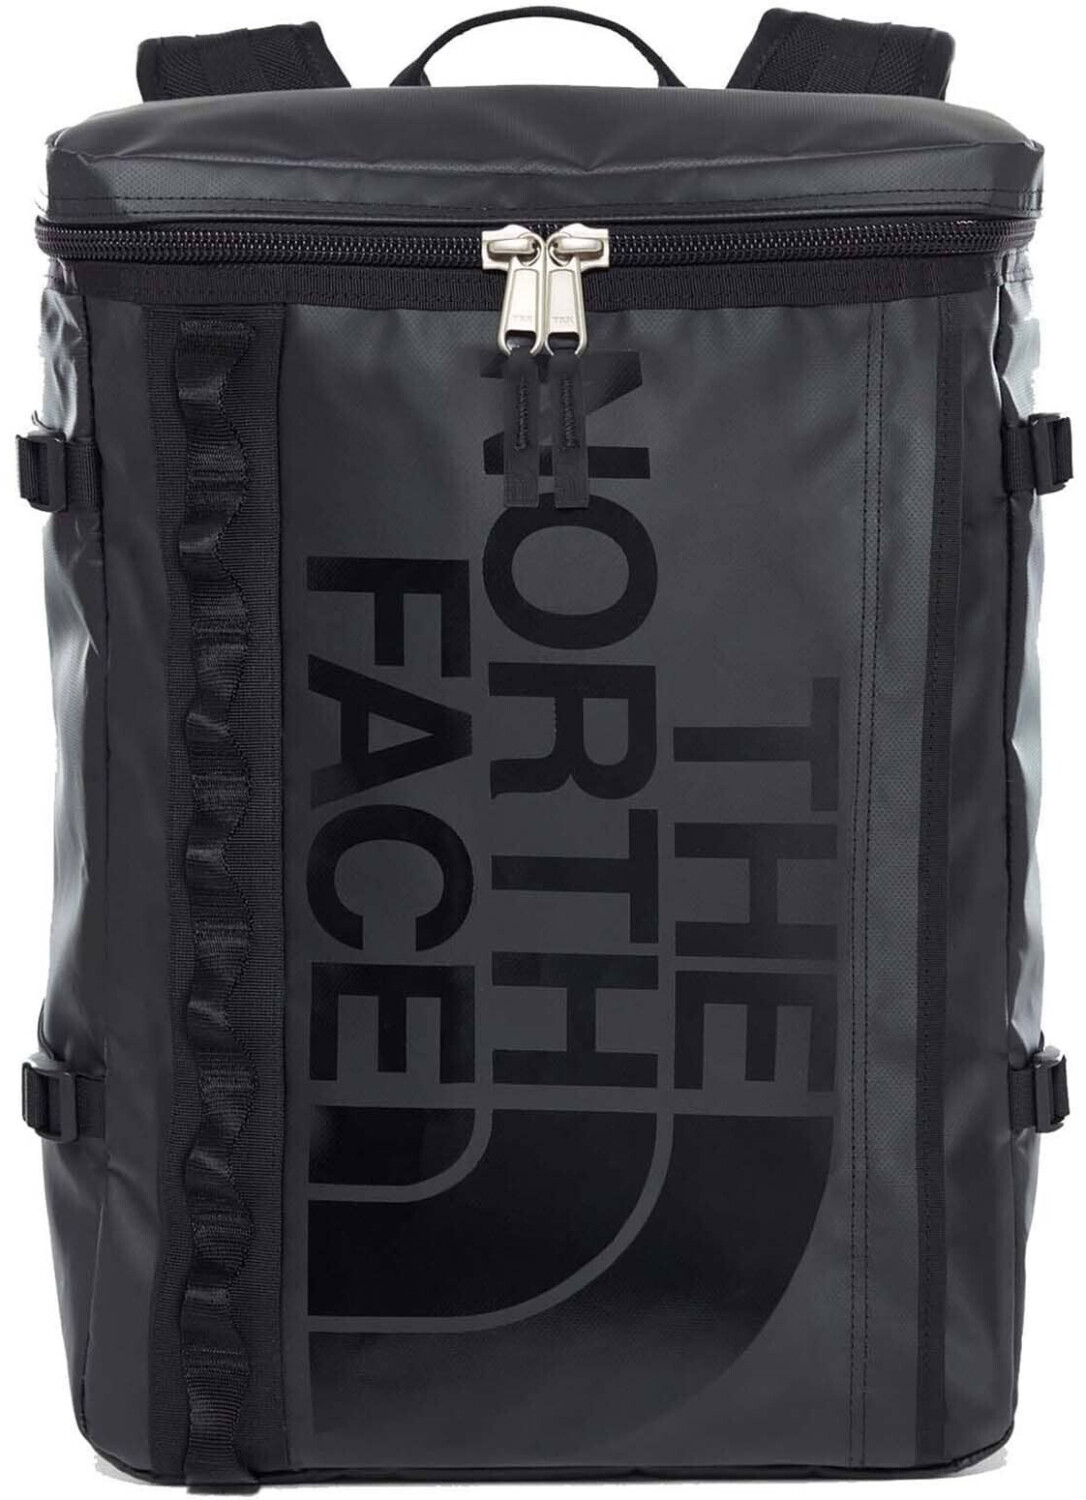 Photos - Backpack The North Face Base Camp Fuse Box tnf black/tnf black 